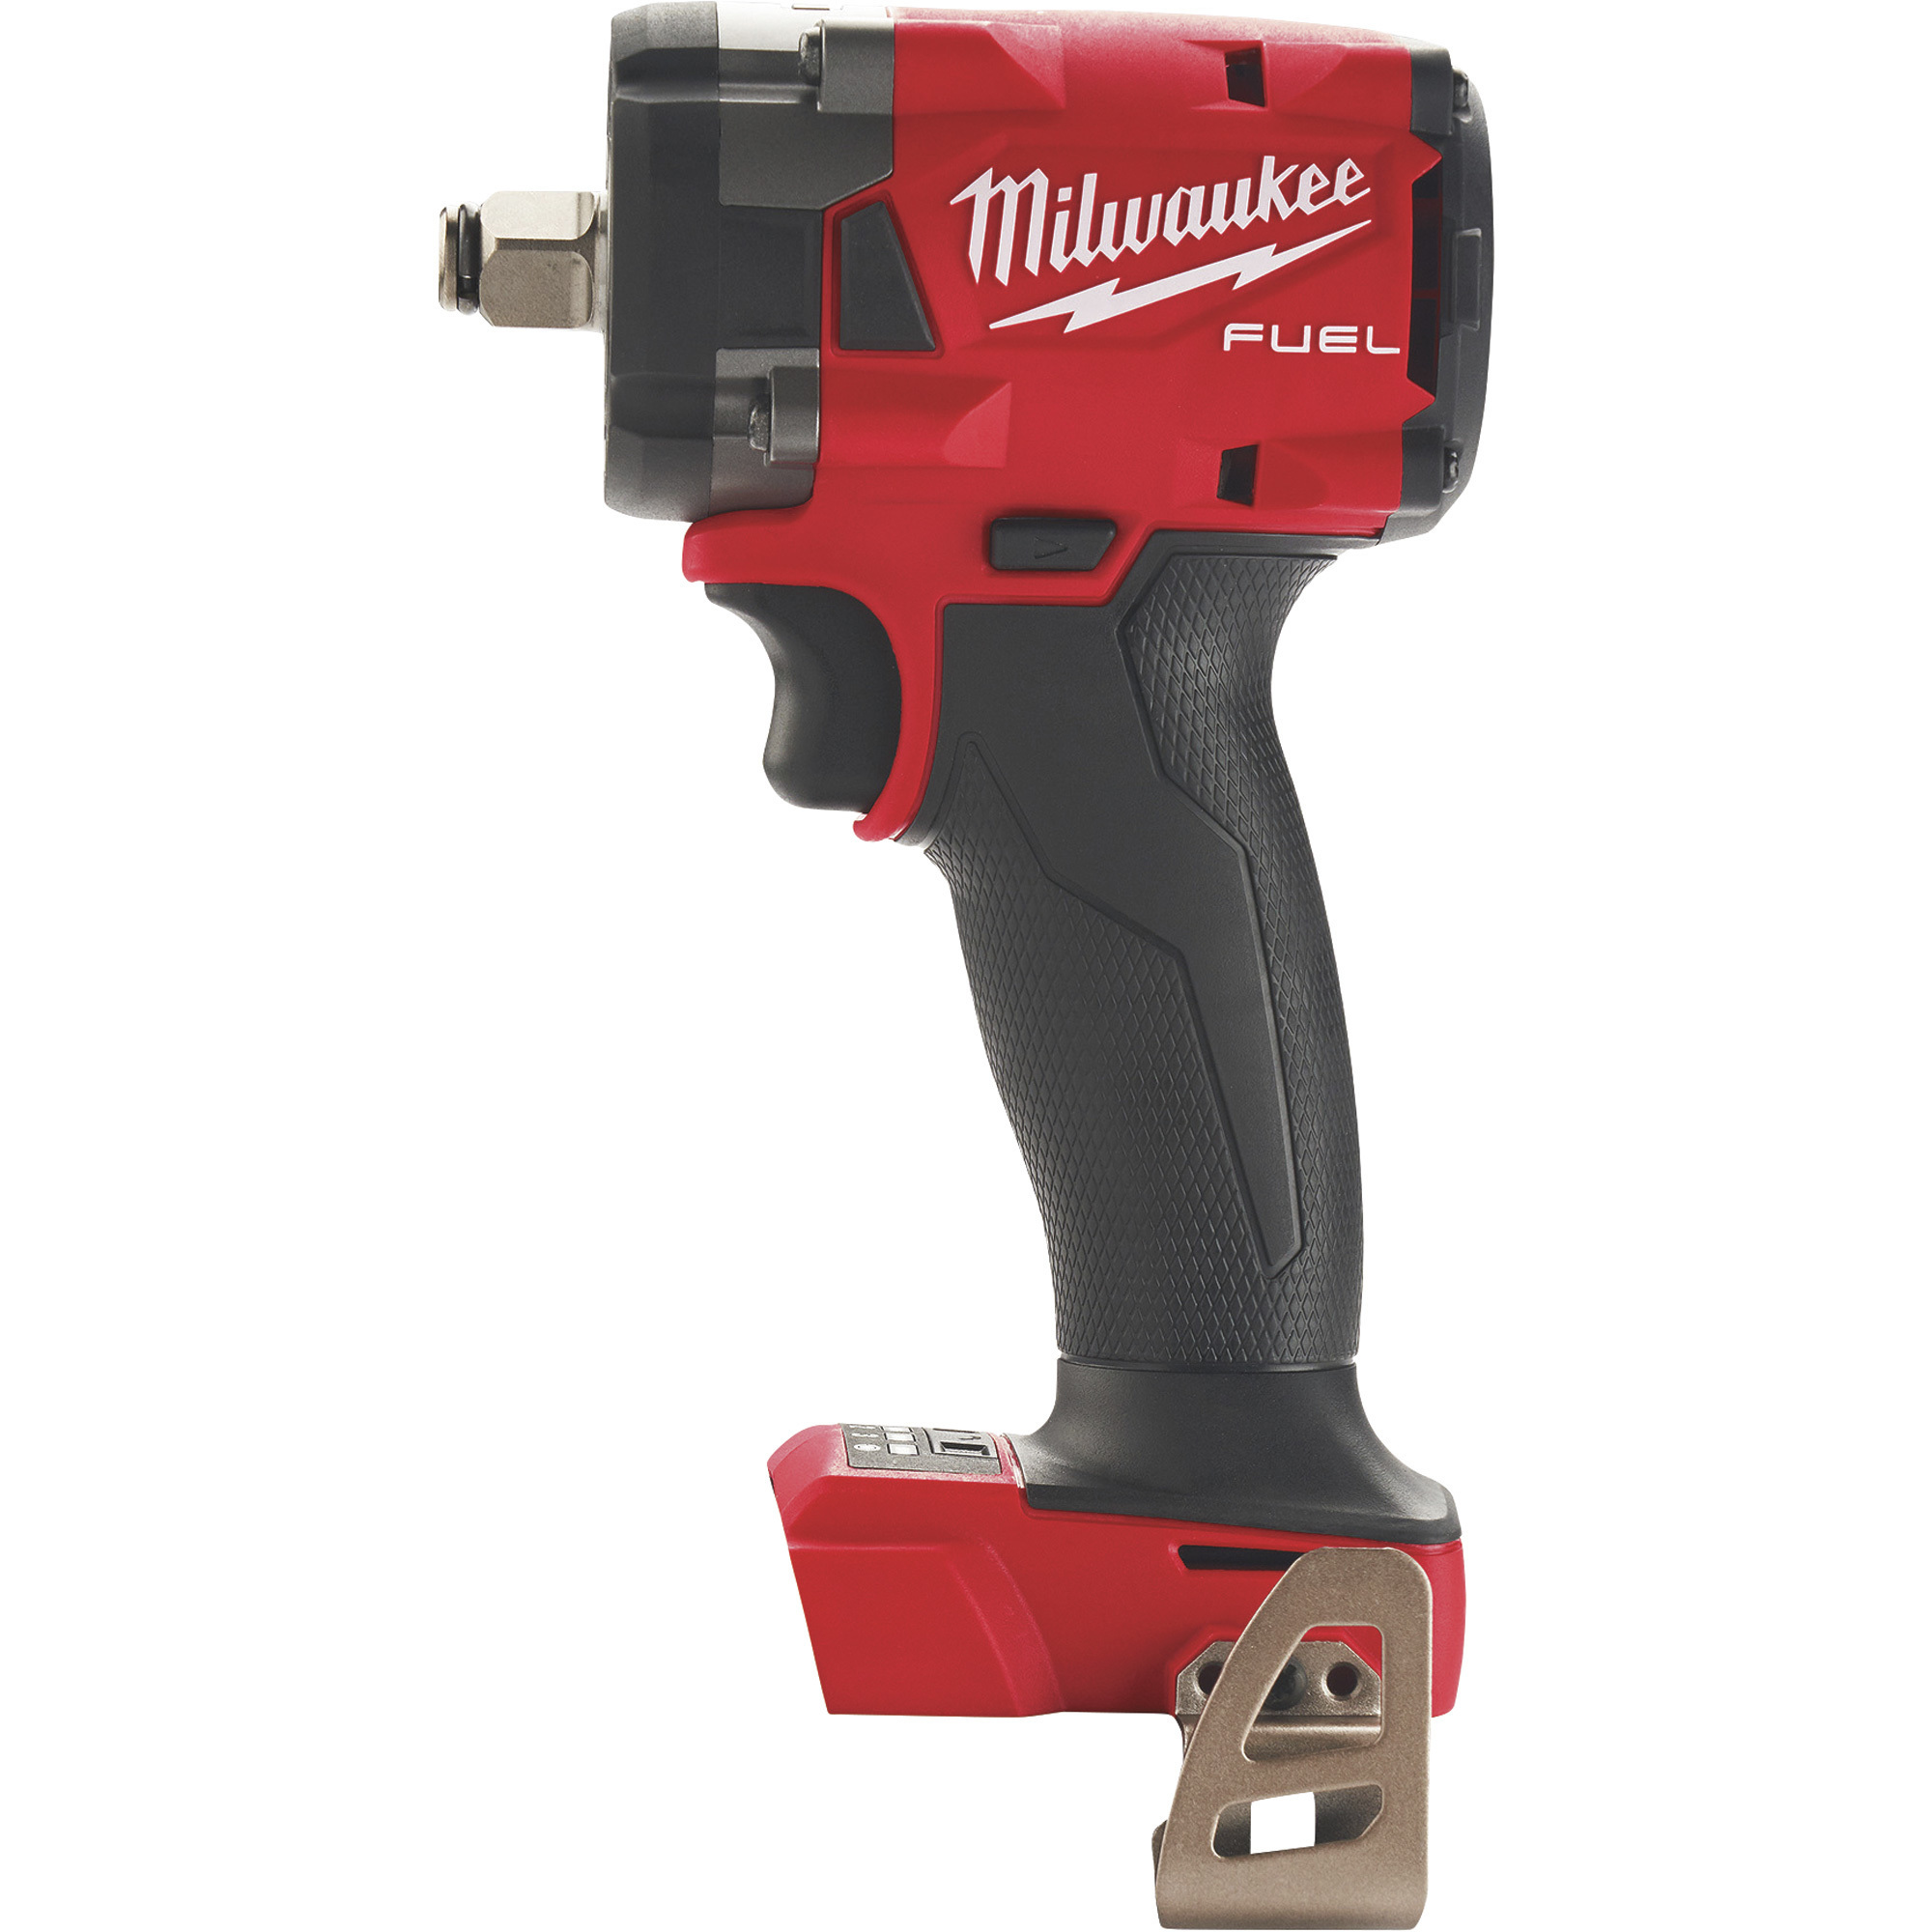 Milwaukee M18 FUEL Compact Impact Wrench with Friction Ring, Tool Only, 1/2Inch Drive, 250 Ft./Lbs. Torque, Model 2855-20